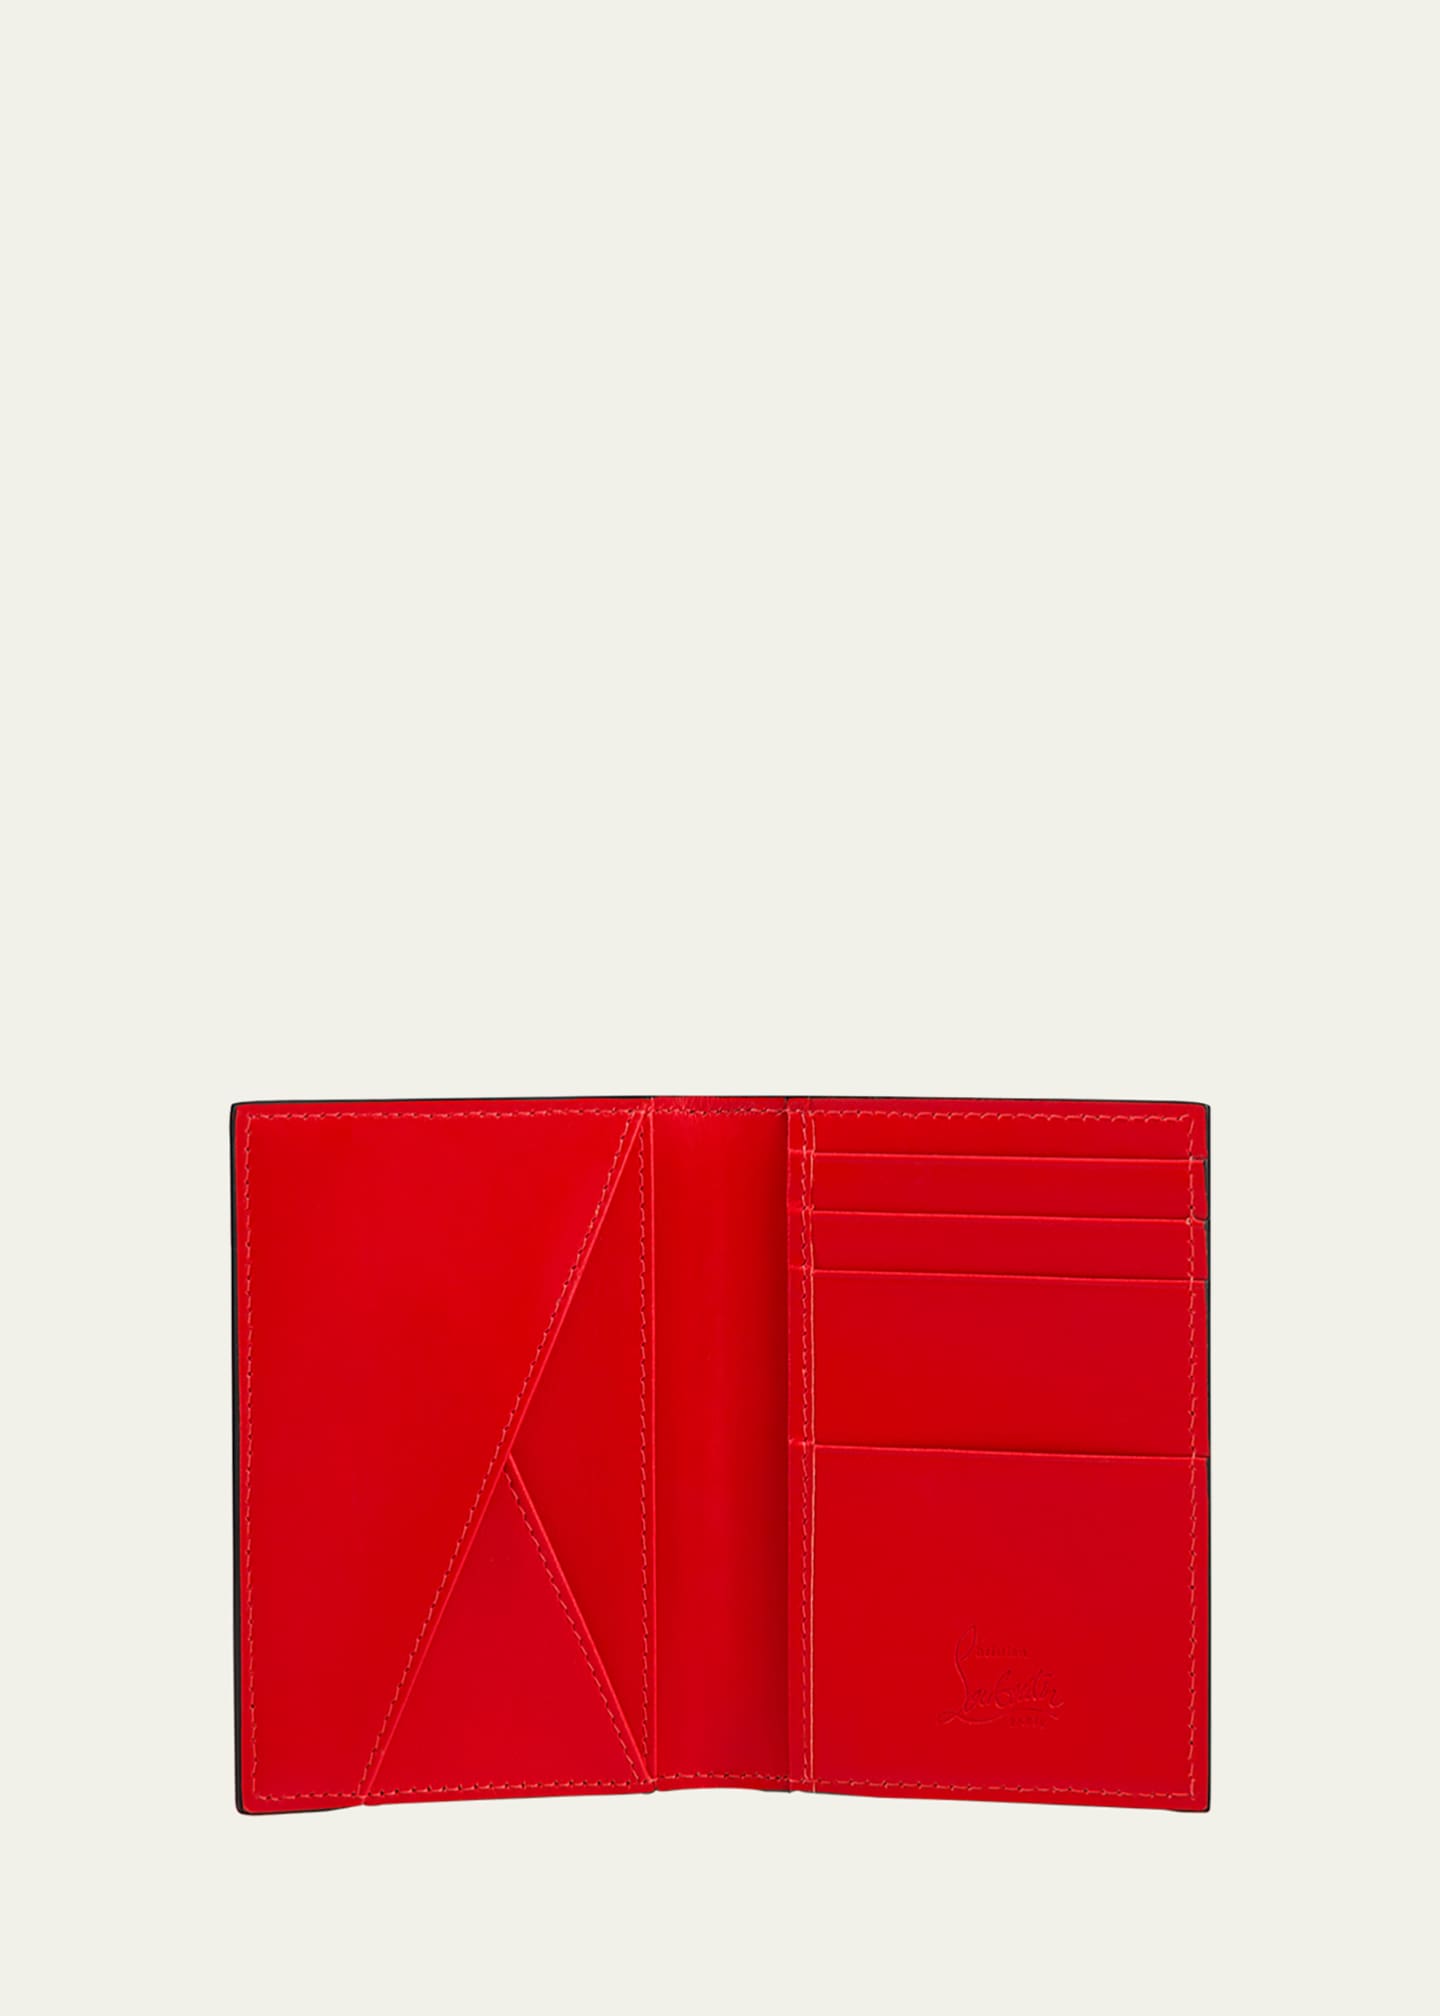 Christian Louboutin Men's Empire Two-Tone Leather Wallet Image 4 of 5